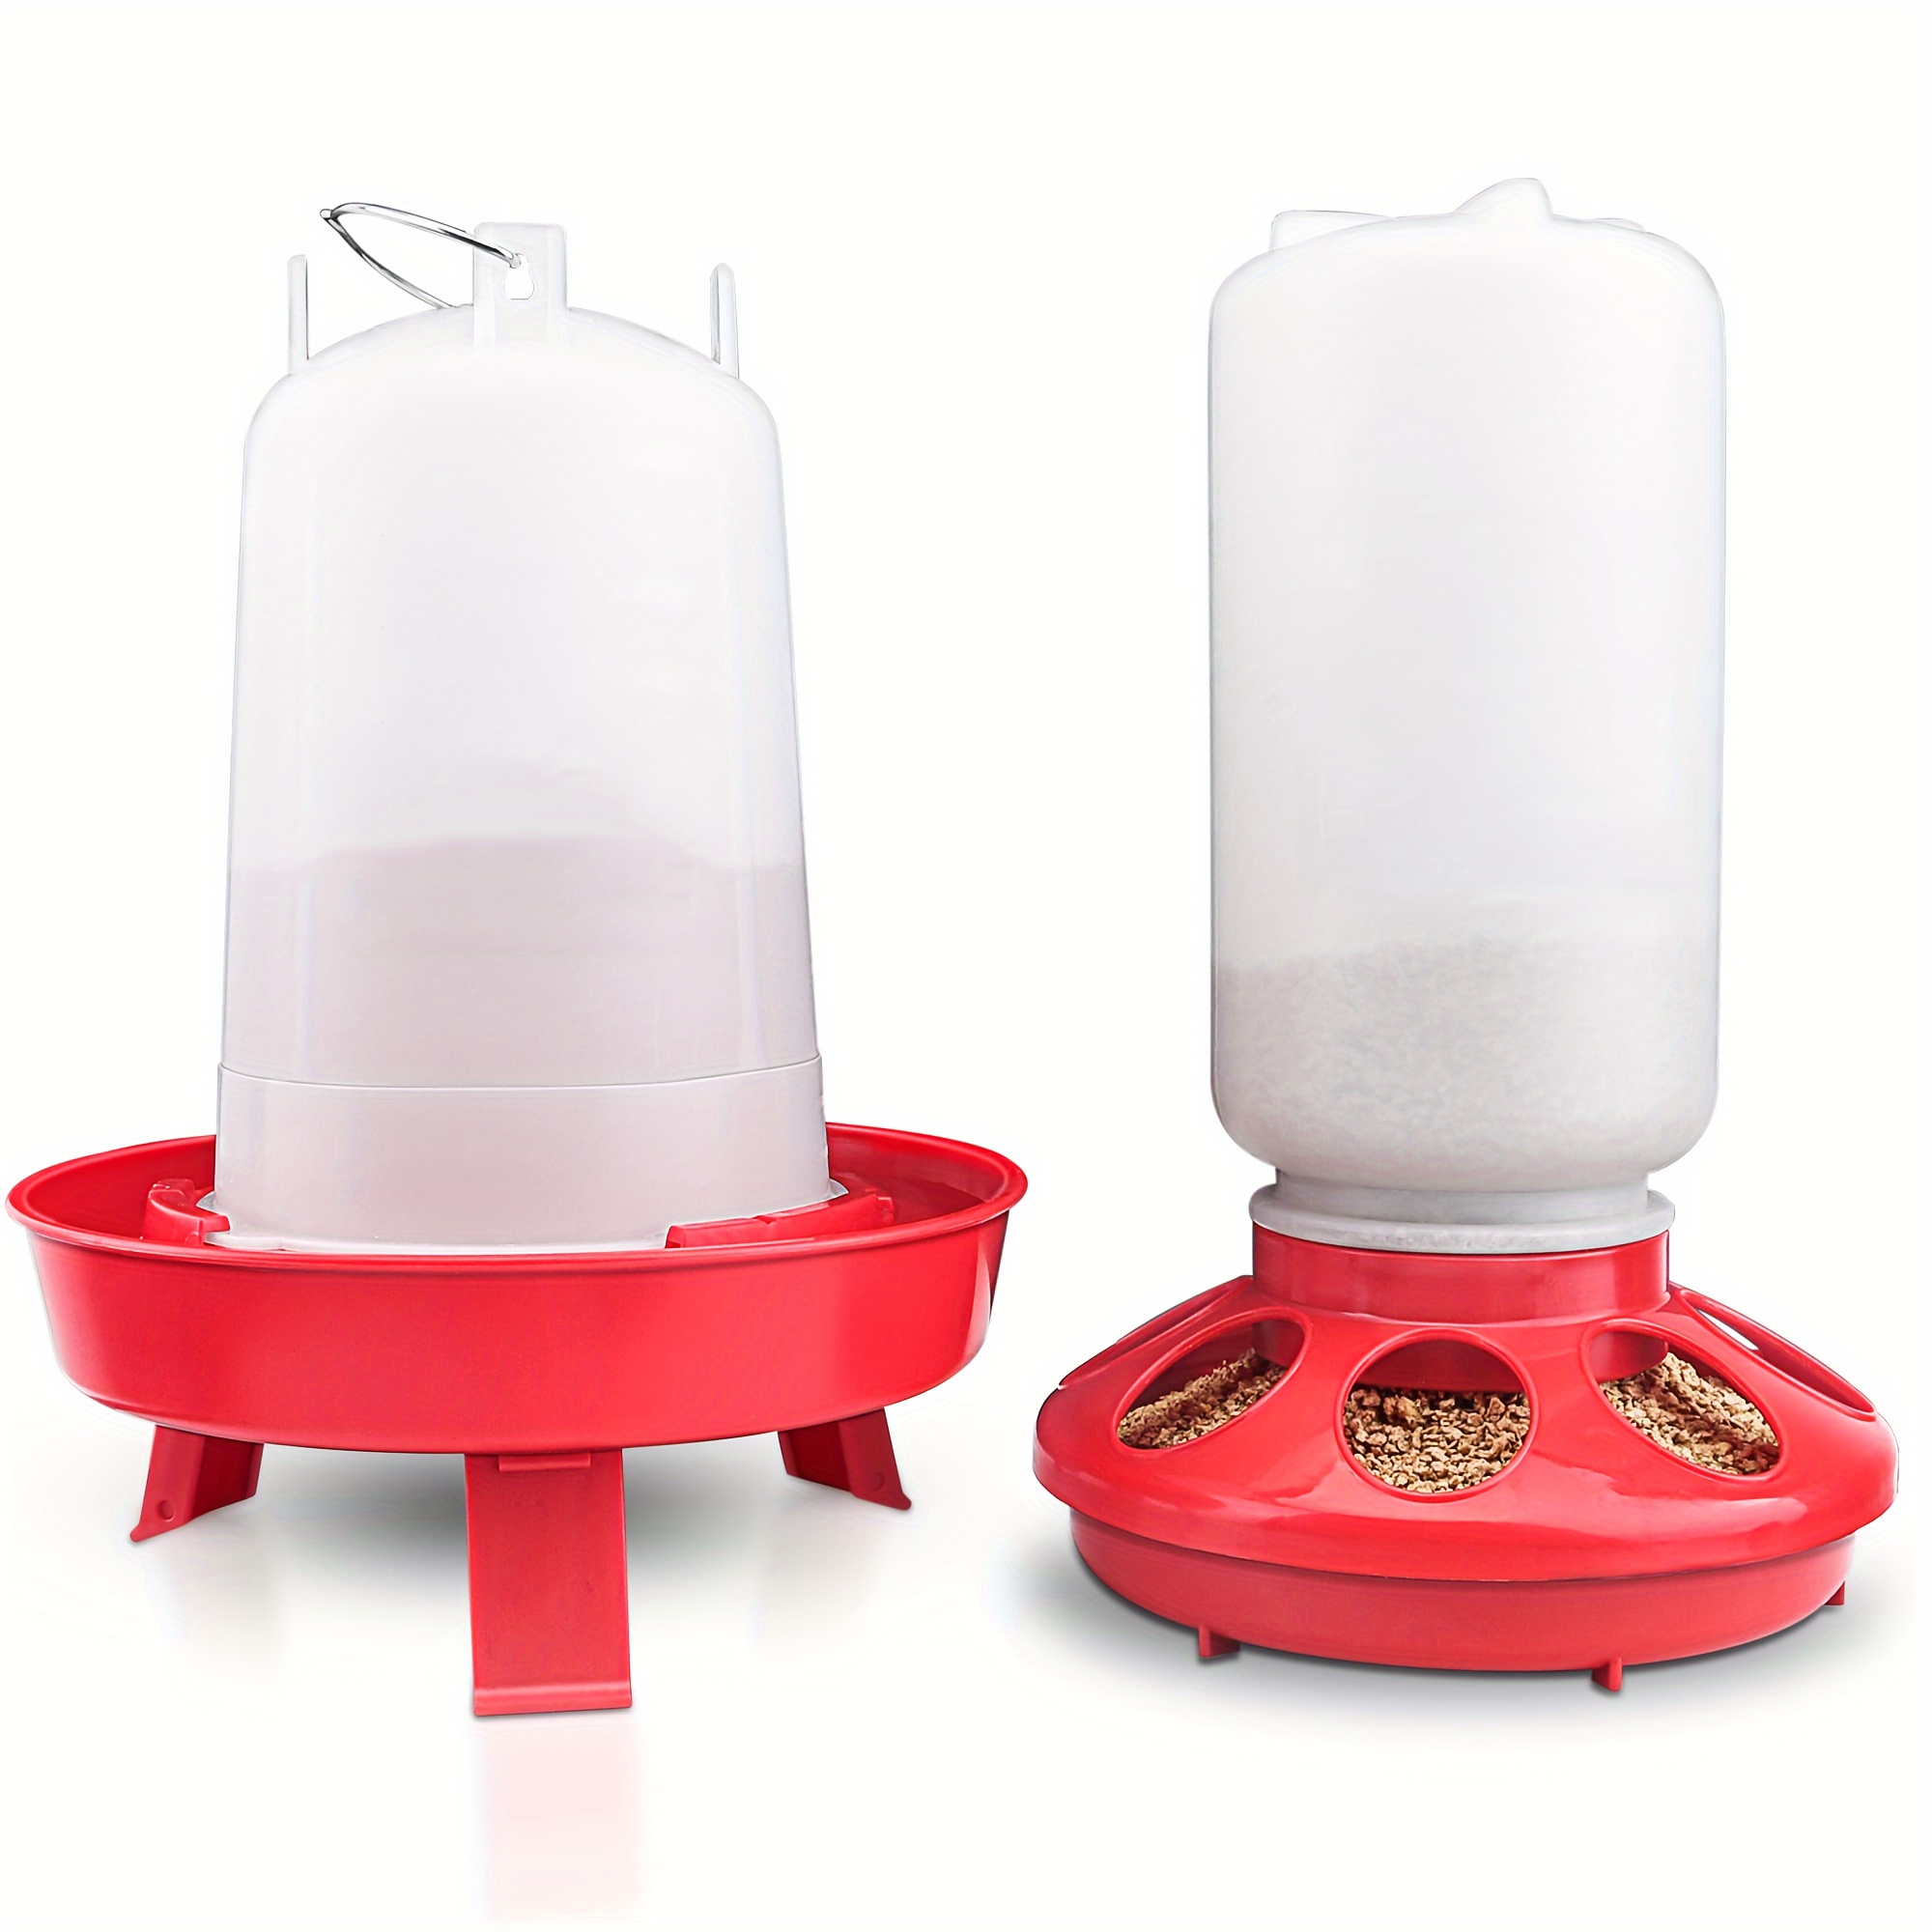 

1 Pack, Poultry Care Set, 1l Red Plastic Chicken Feeder & 1.5l Bpa-free Hanging Waterer, Durable Chick Feeder For Duckling Quail, Starter Kit With Translucent Design For Easy Level Check